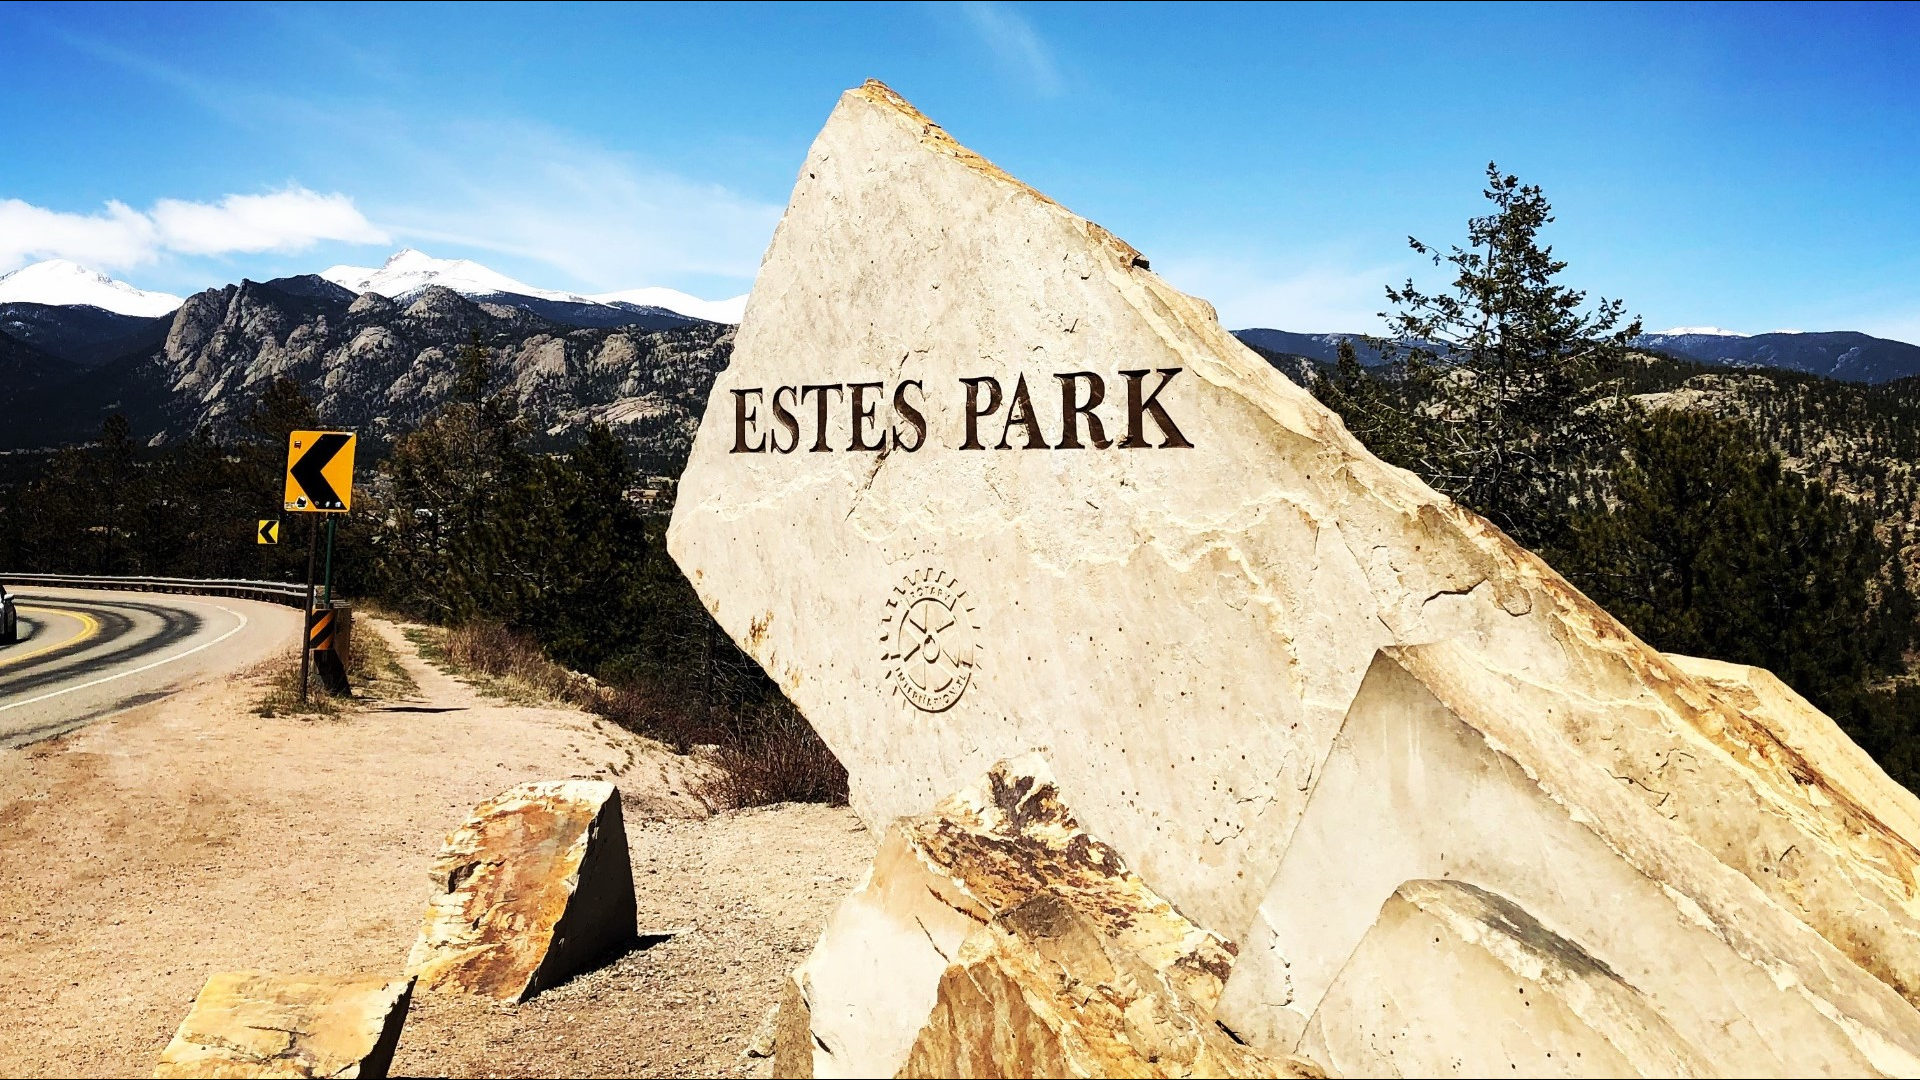 Tuesday night, voters overwhelmingly rejected the idea to allow cannabis shops in Estes Park with 68 percent voting 'no'.